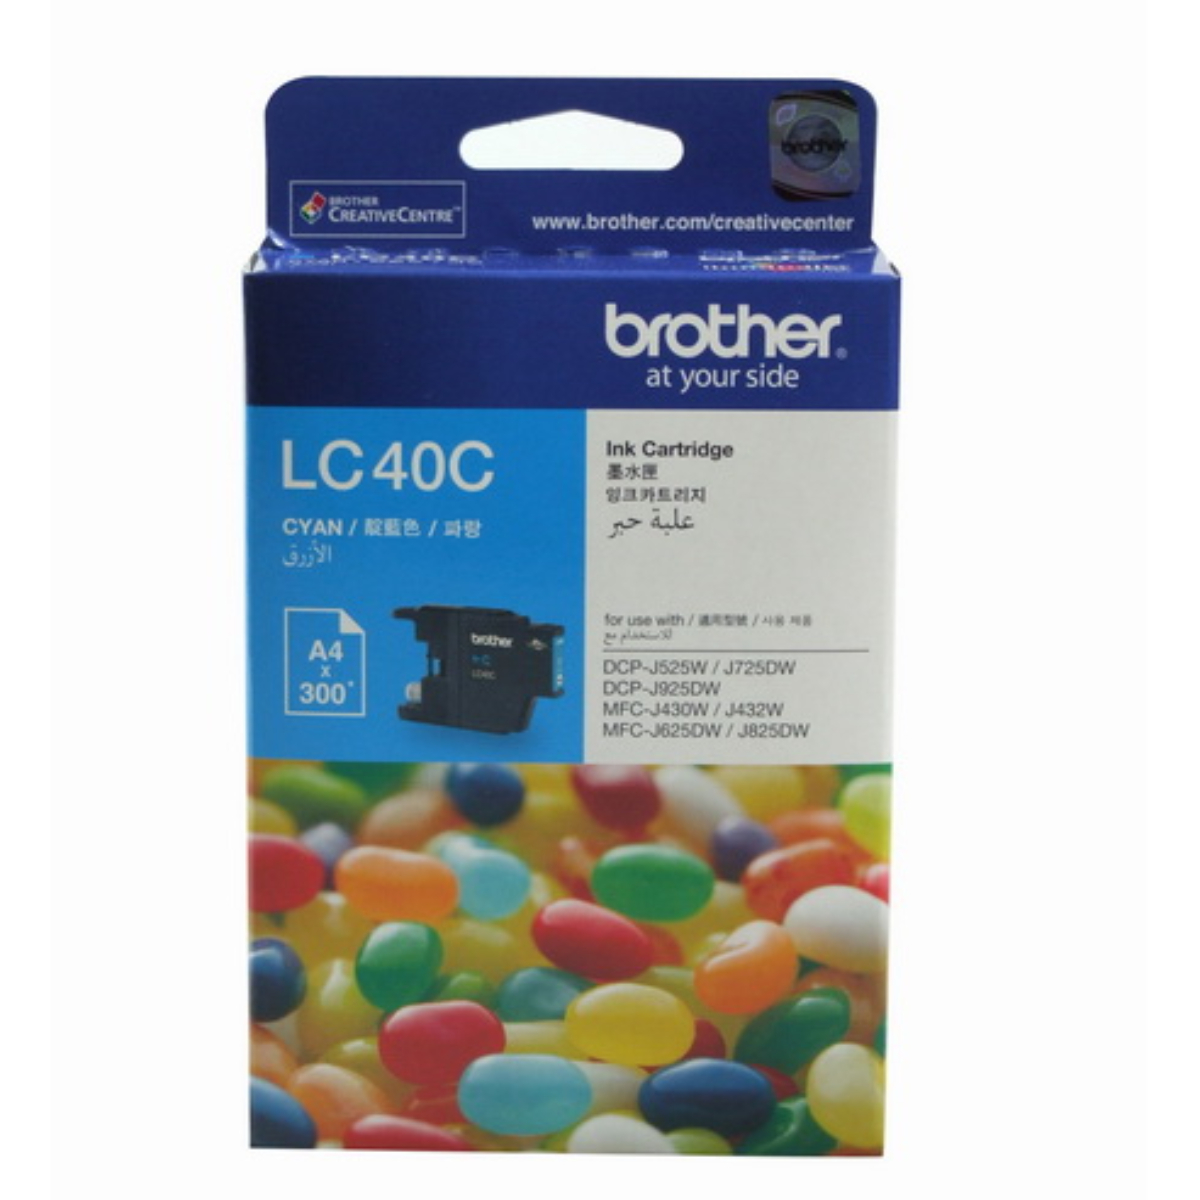 Brother Ink Cartridge (Blue) LC-40C